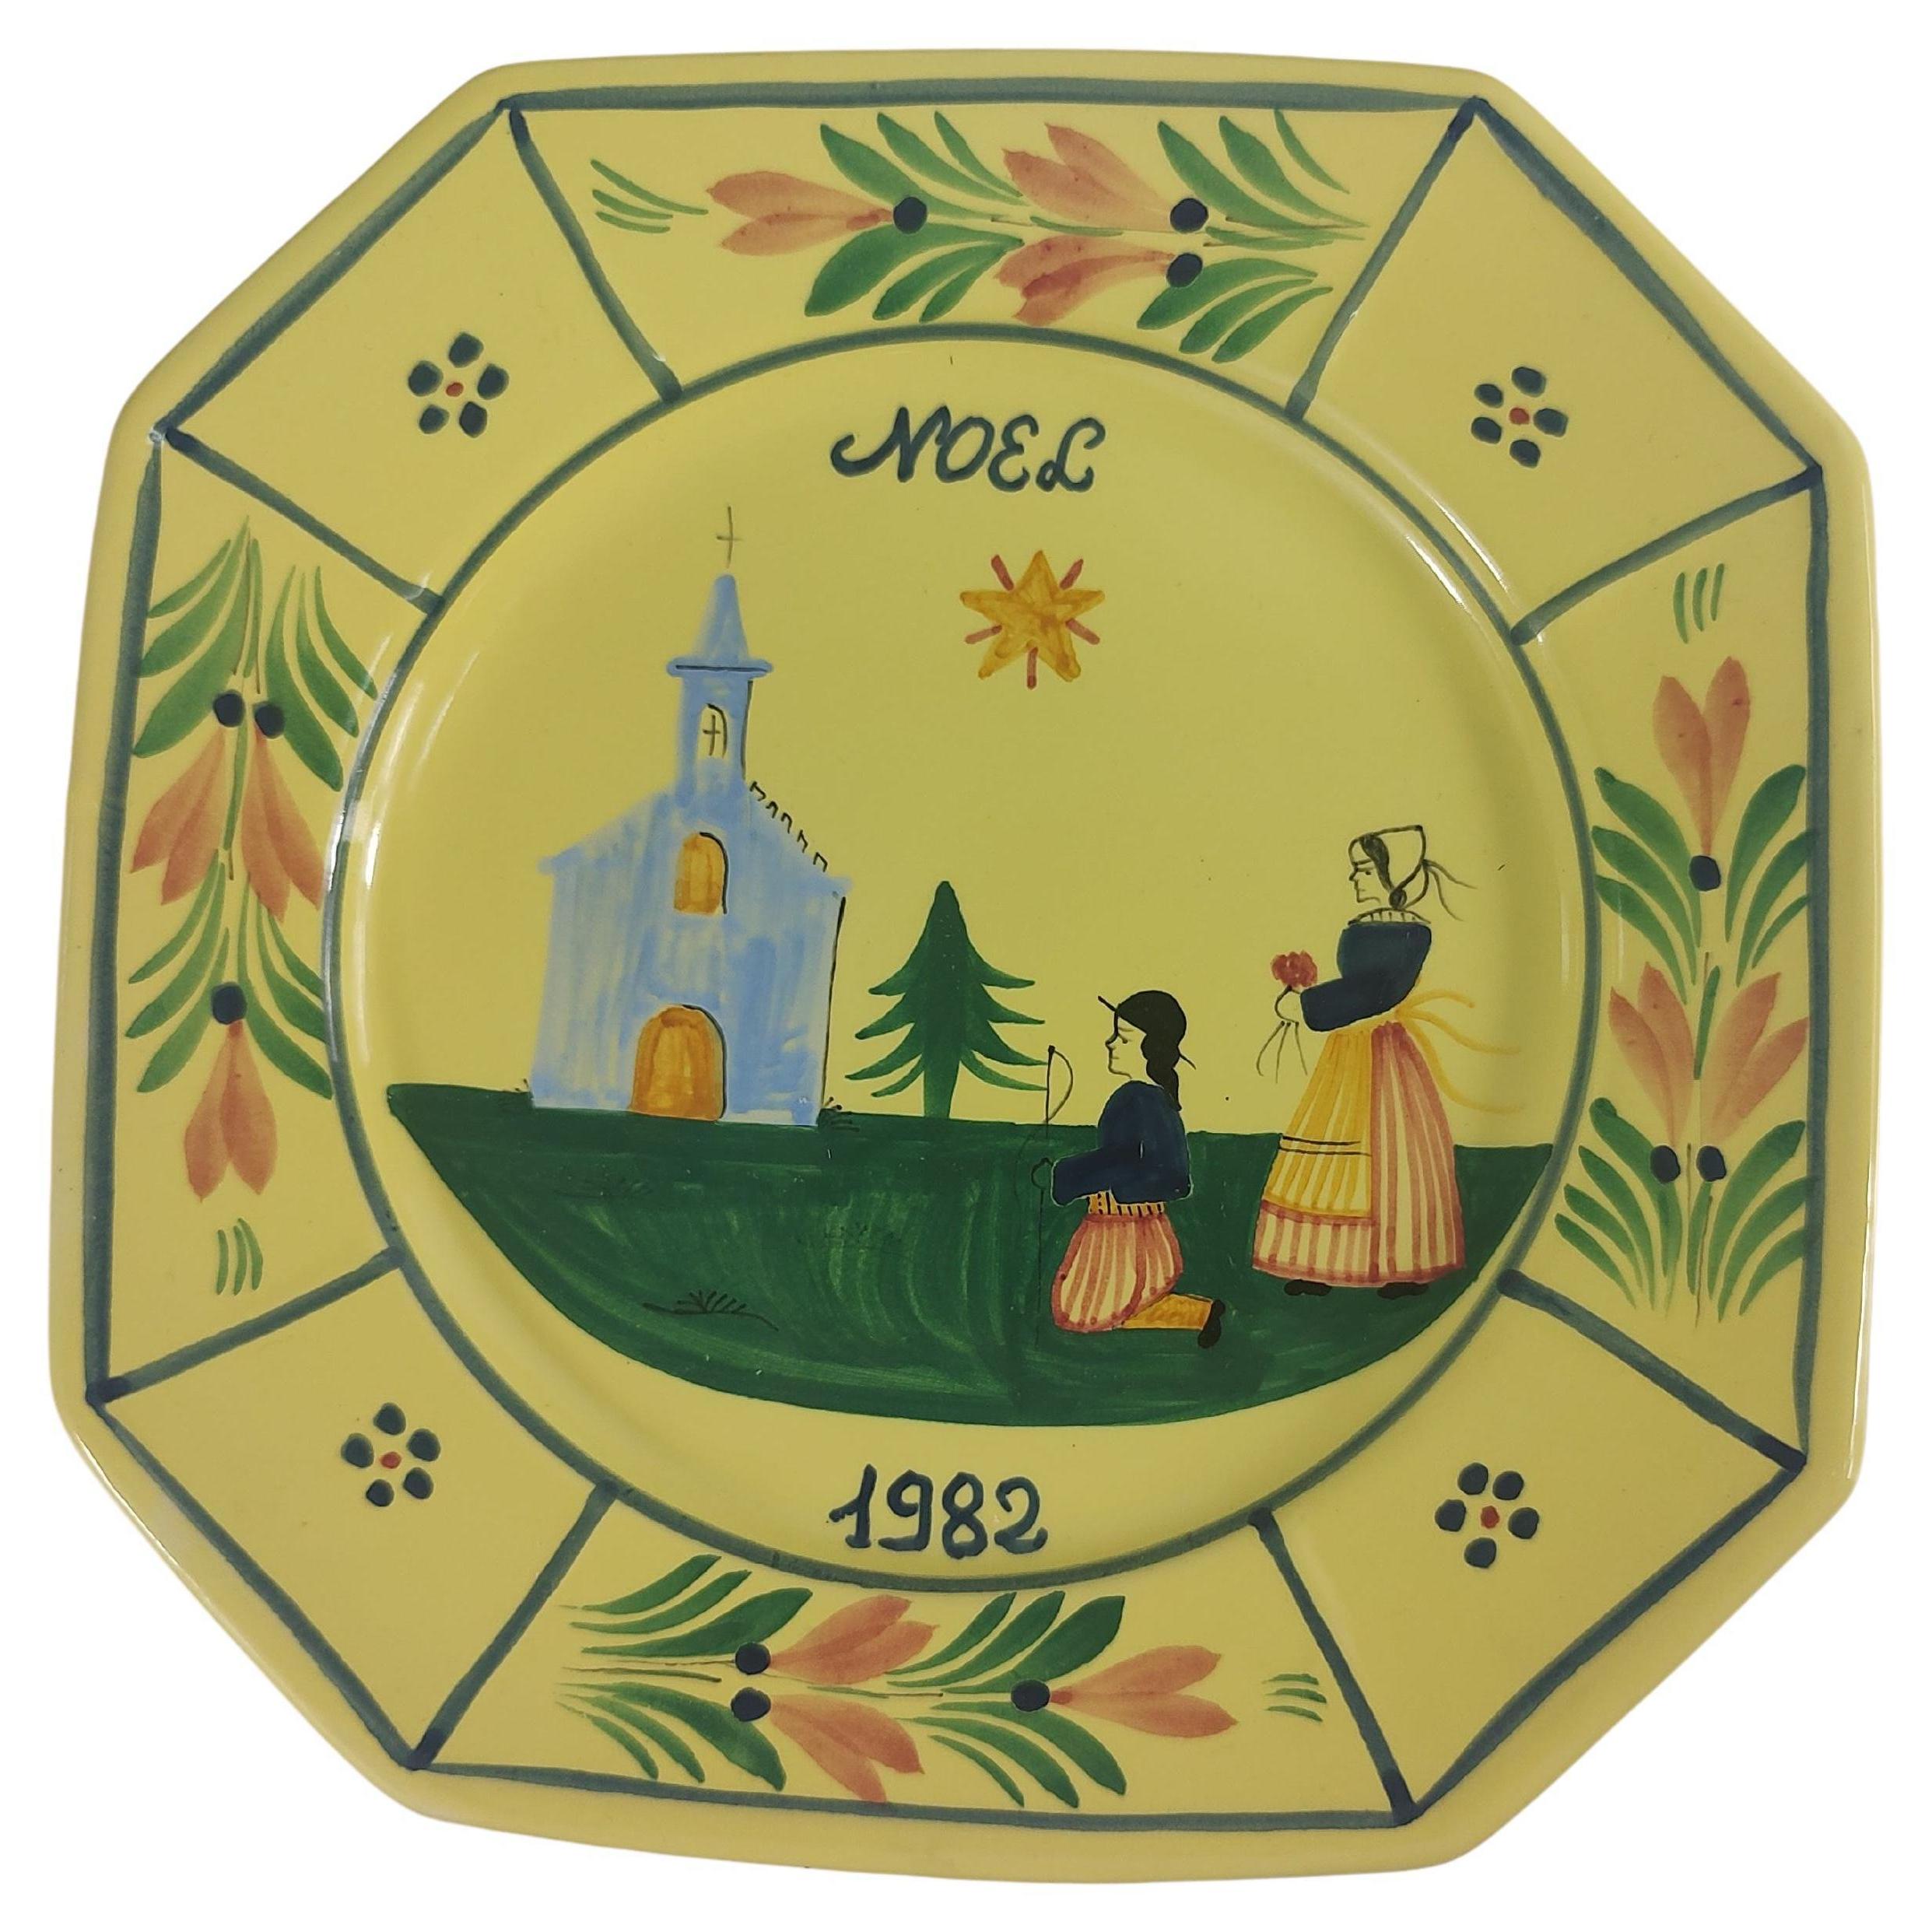 Quimper Noel 1982 Christmas Plate with Breton Peasant Figures in a Spiritual Set For Sale